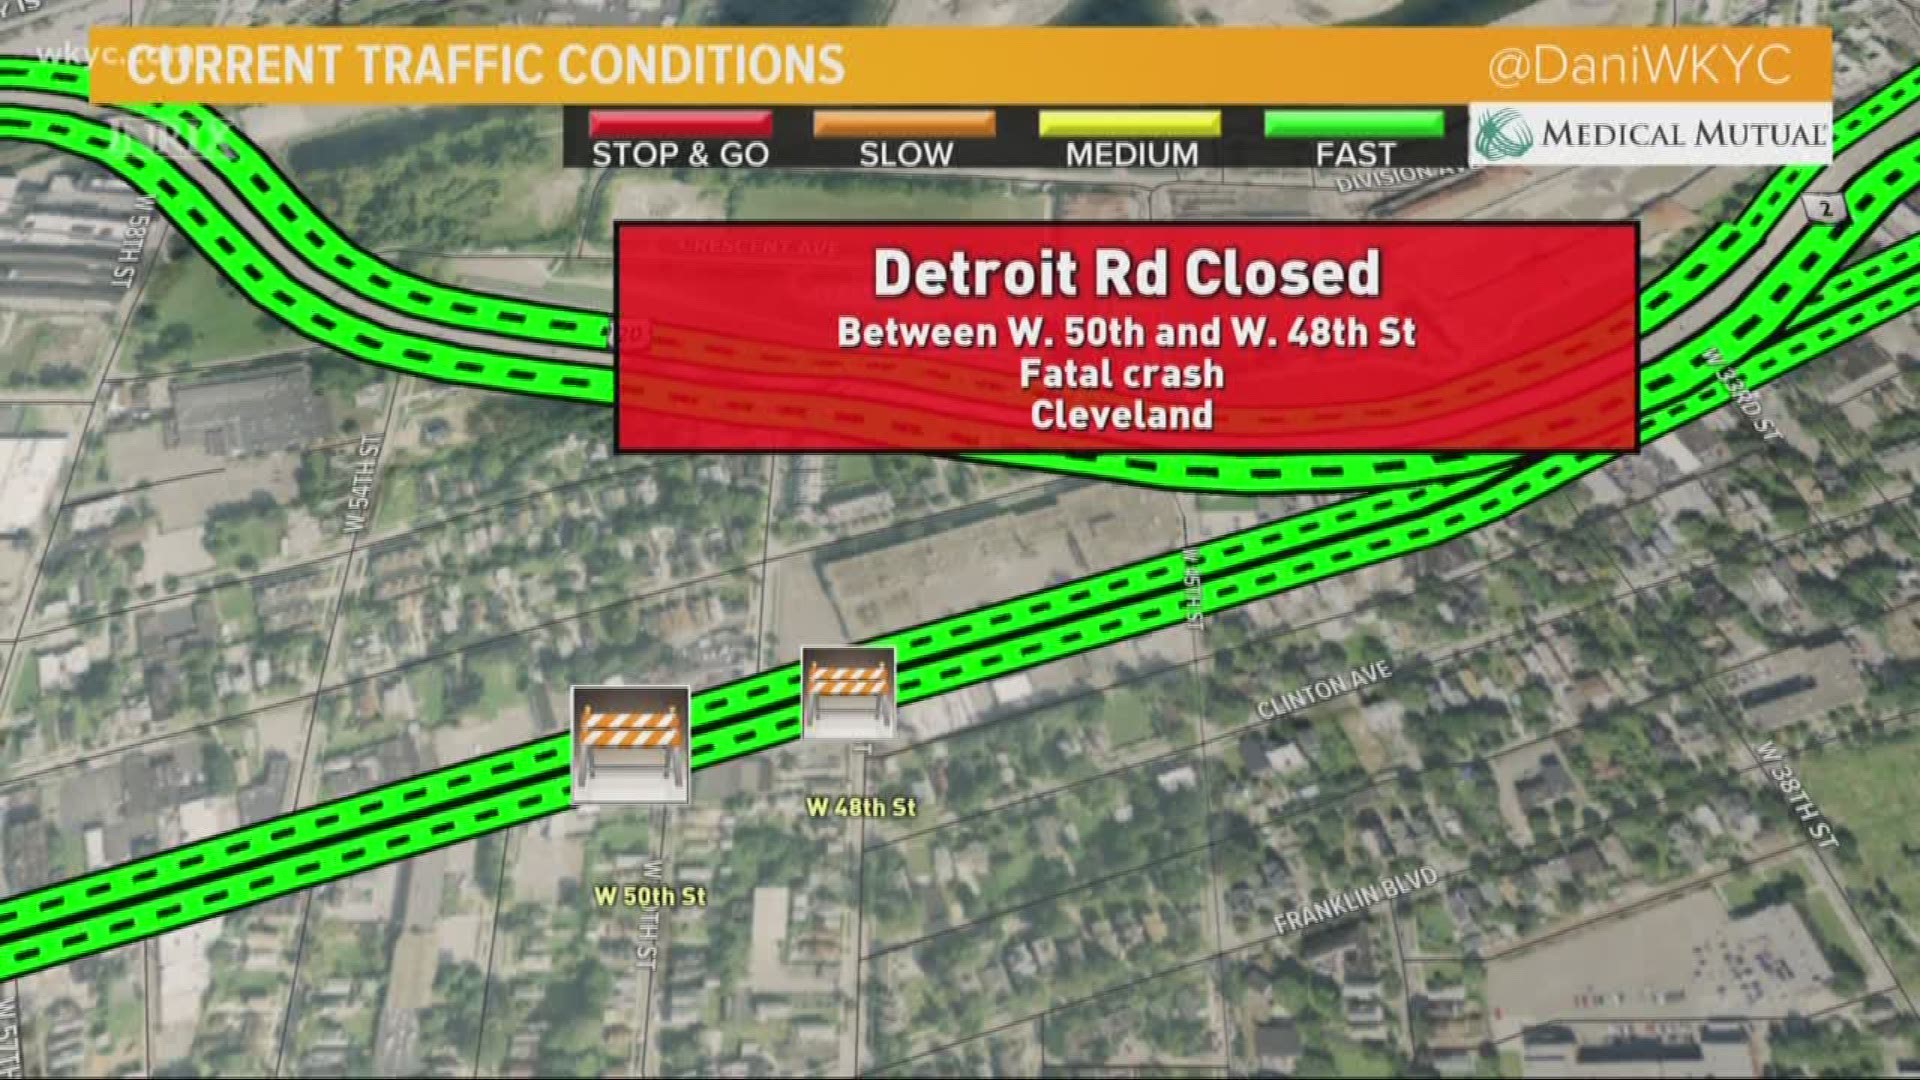 May 29, 2019: Authorities say one person is dead following an early morning crash involving two vehicles on Detroit Road. As a result, crews closed Detroit Road between West 50th and West 48th.